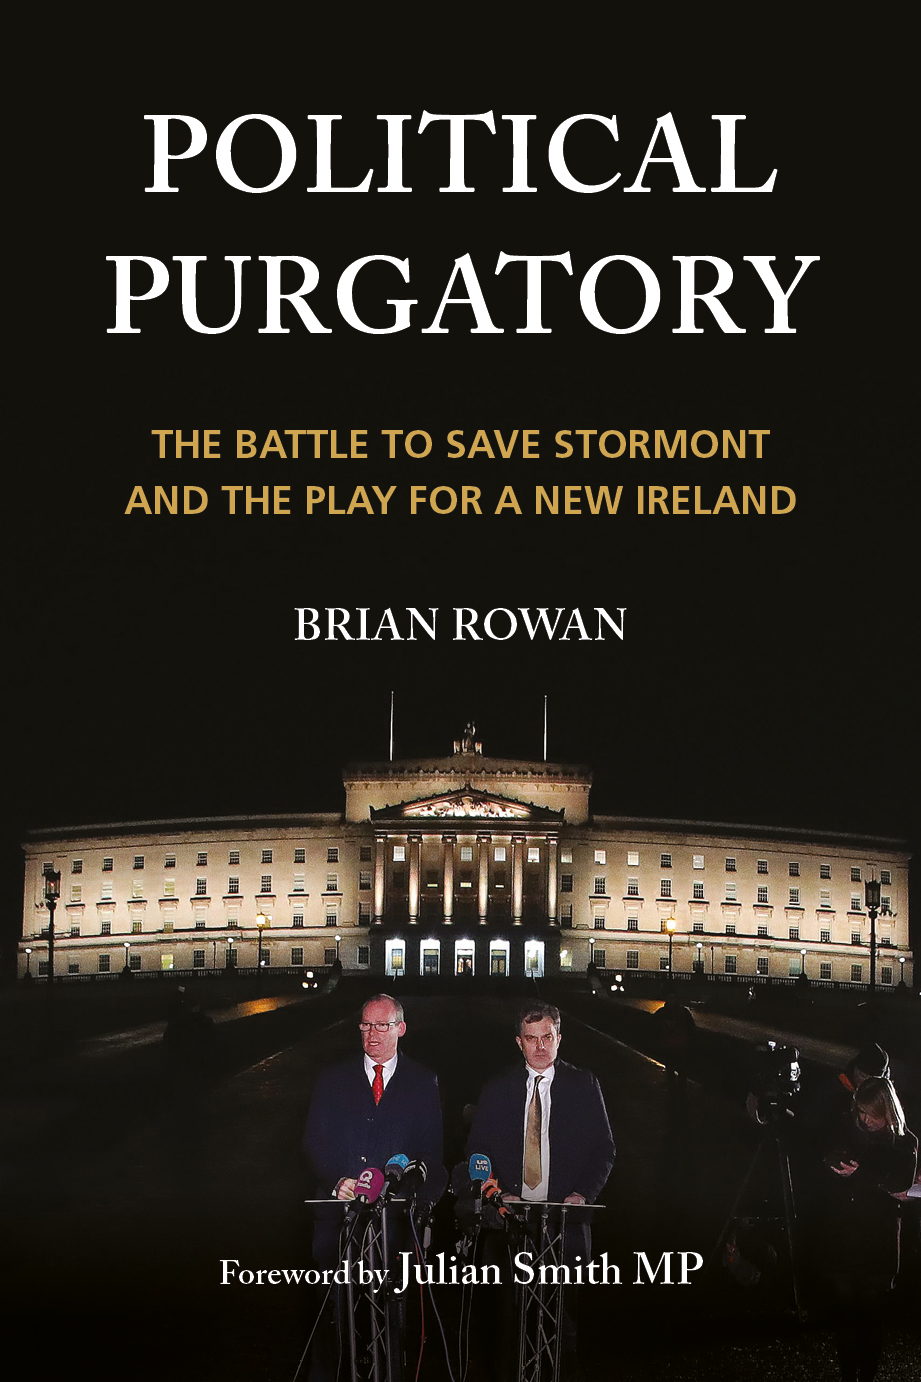 Political Purgatory: The Battle to Save Stormont and the Play for a New Ireland